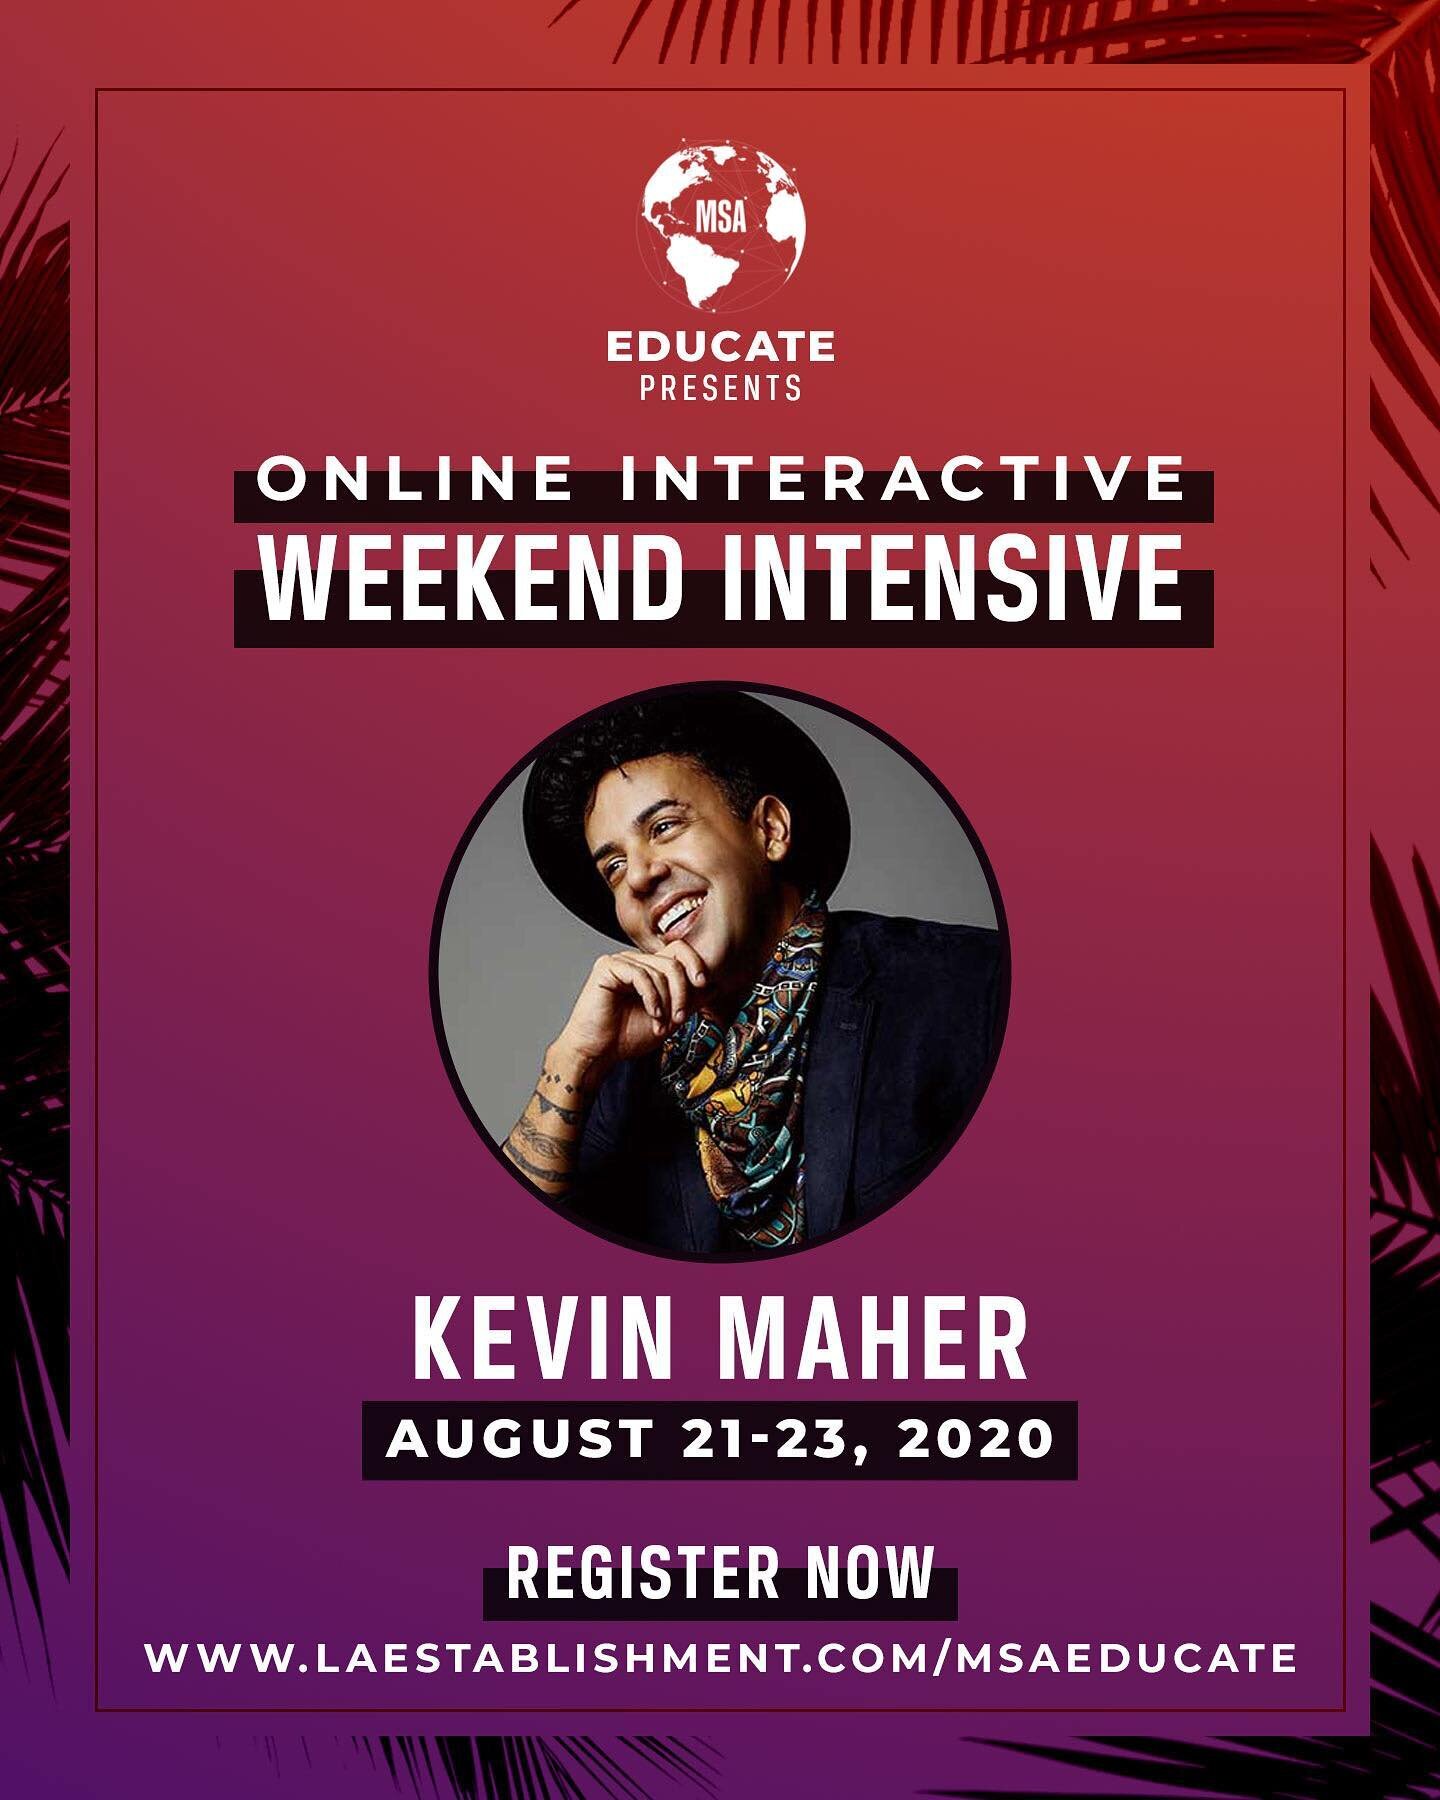 Join us this weekend for our Online Intensive to train with @kmaher56 and the rest of our incredible faculty of @msaagency educators! Register NOW at www.laestablishment.com/msaeducate!